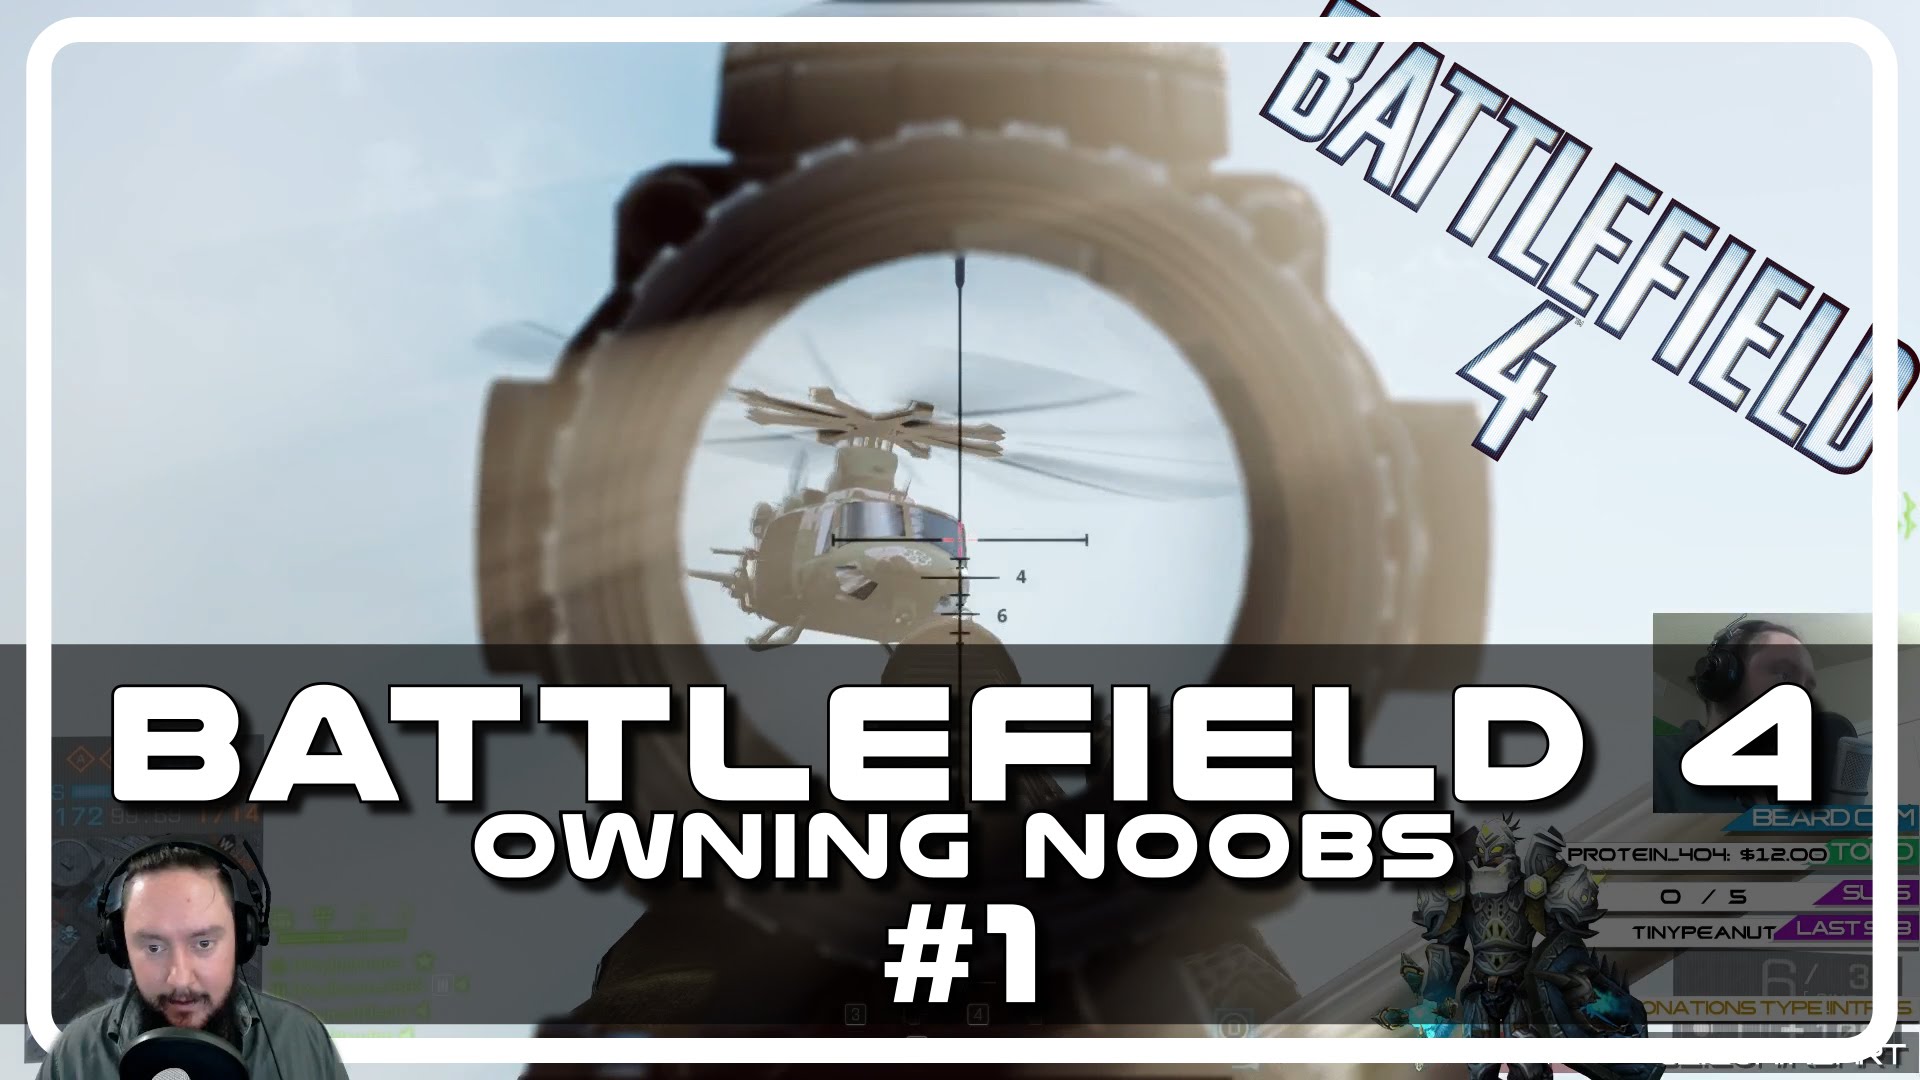 Battlefield 4 – BF4 with Psynaps #01 – the Wallmart Greeter of BF4 (PC Gameplay Funny Moments)